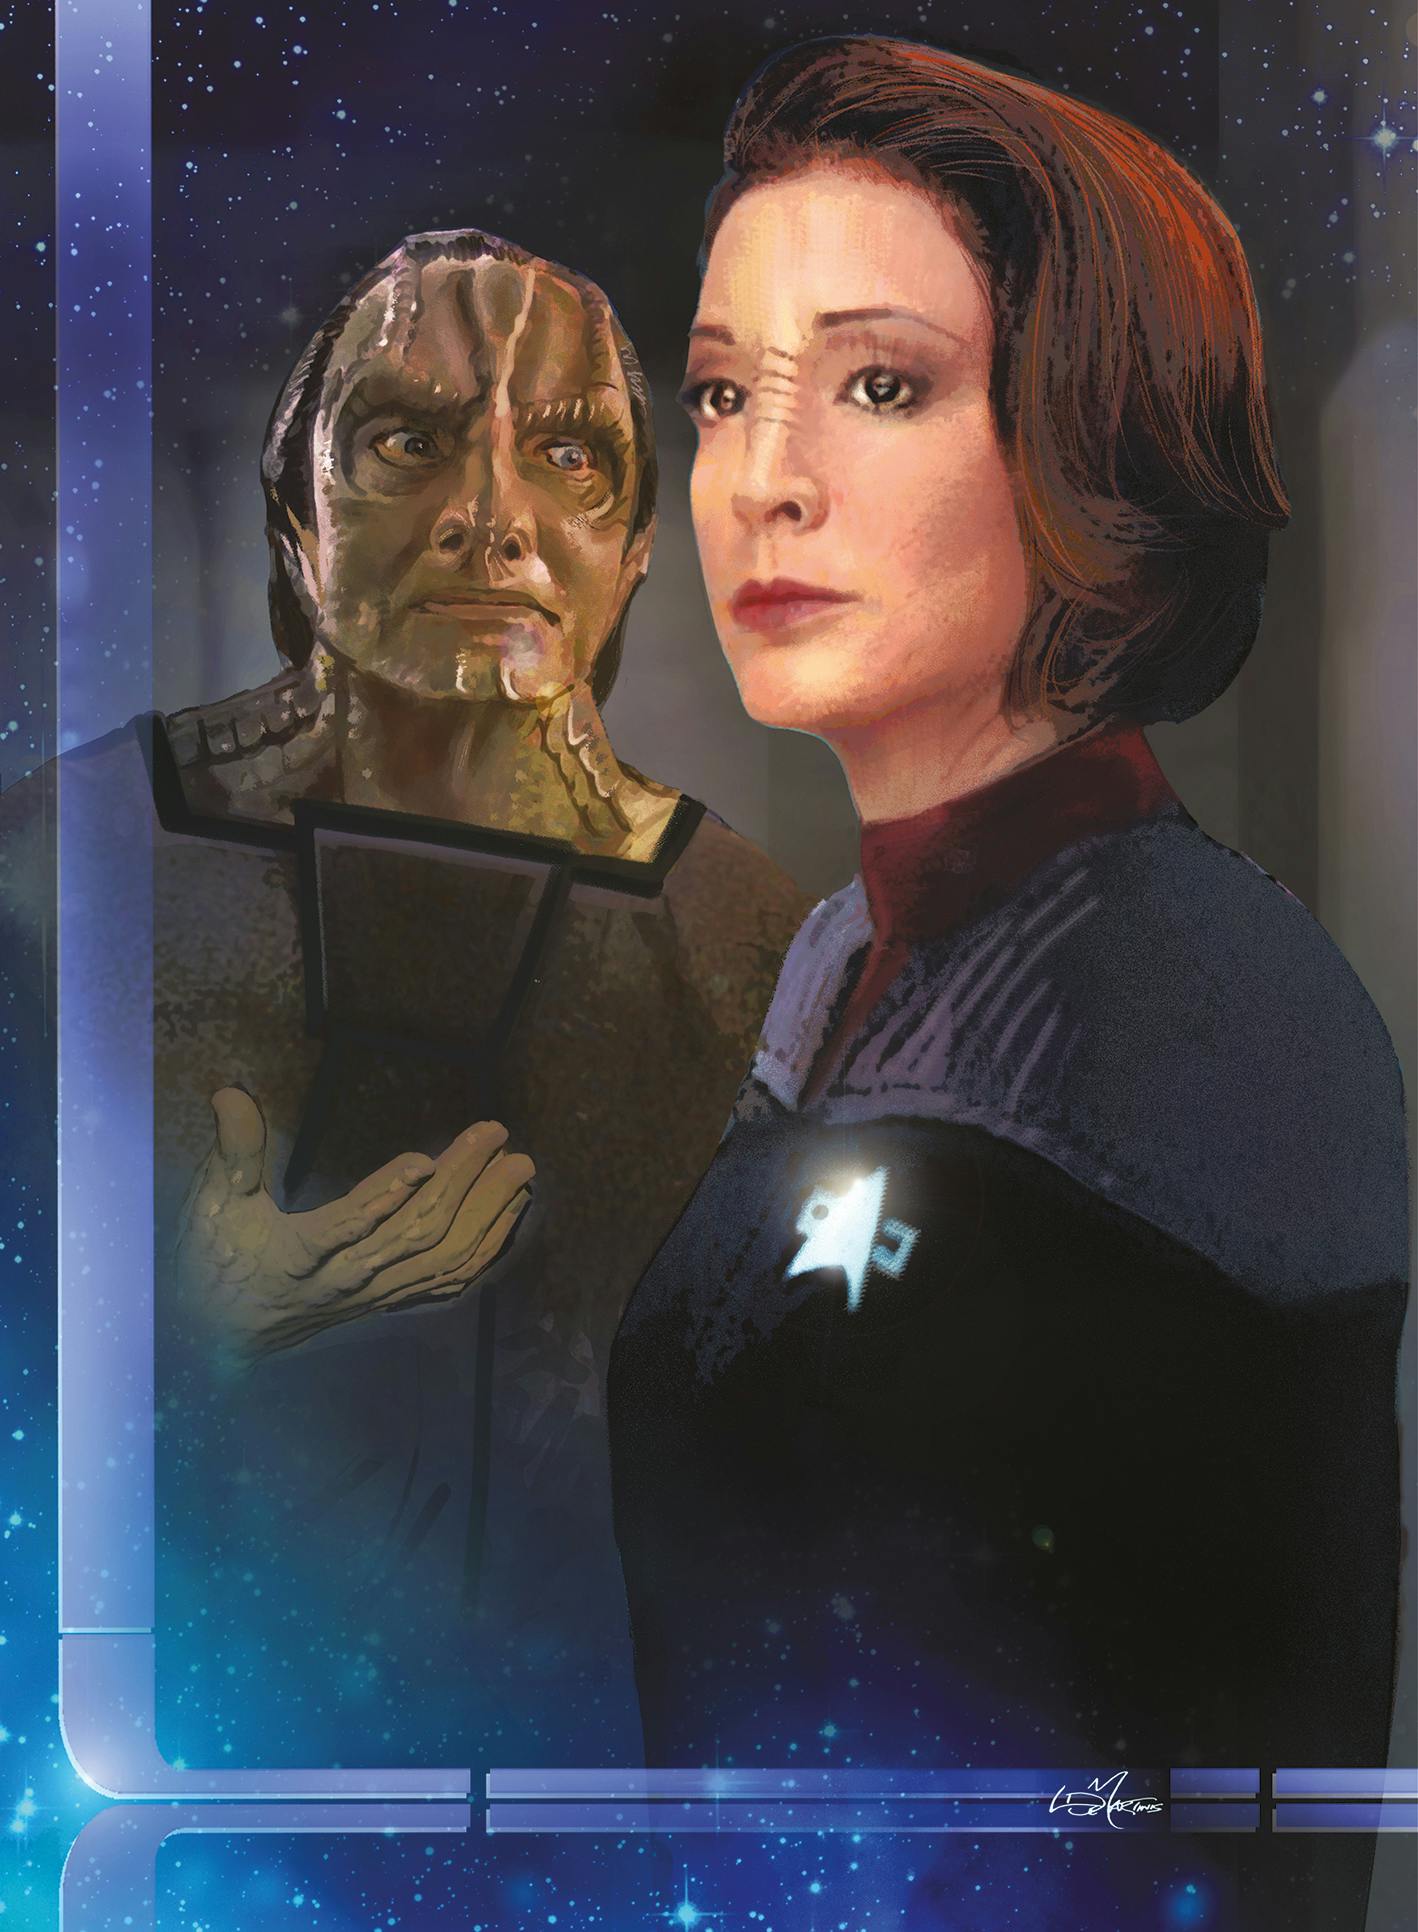 'Things Can Only Get Better' cover art by Louie De Martinis featuring Garak and Kira Nerys